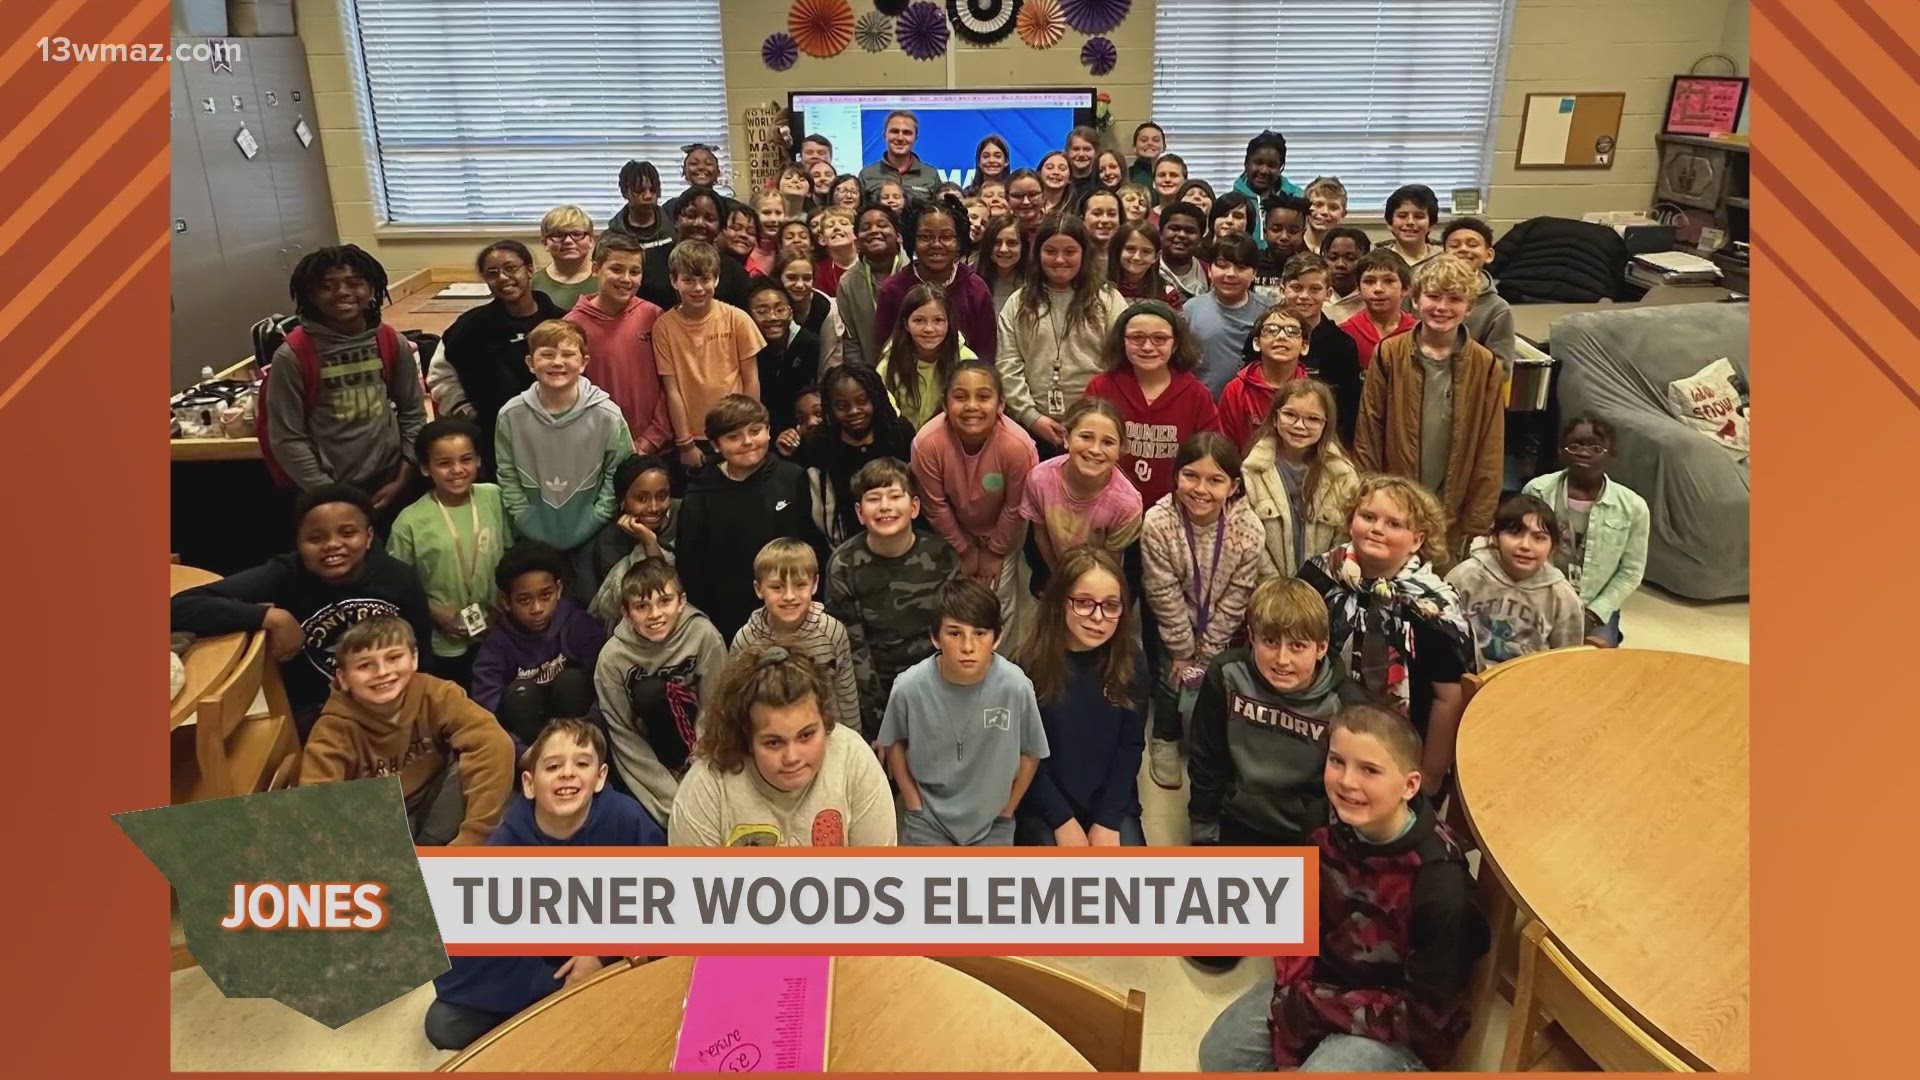 Alex Forbes spoke to the 4th graders at Turner Woods Elementary School in Gray.